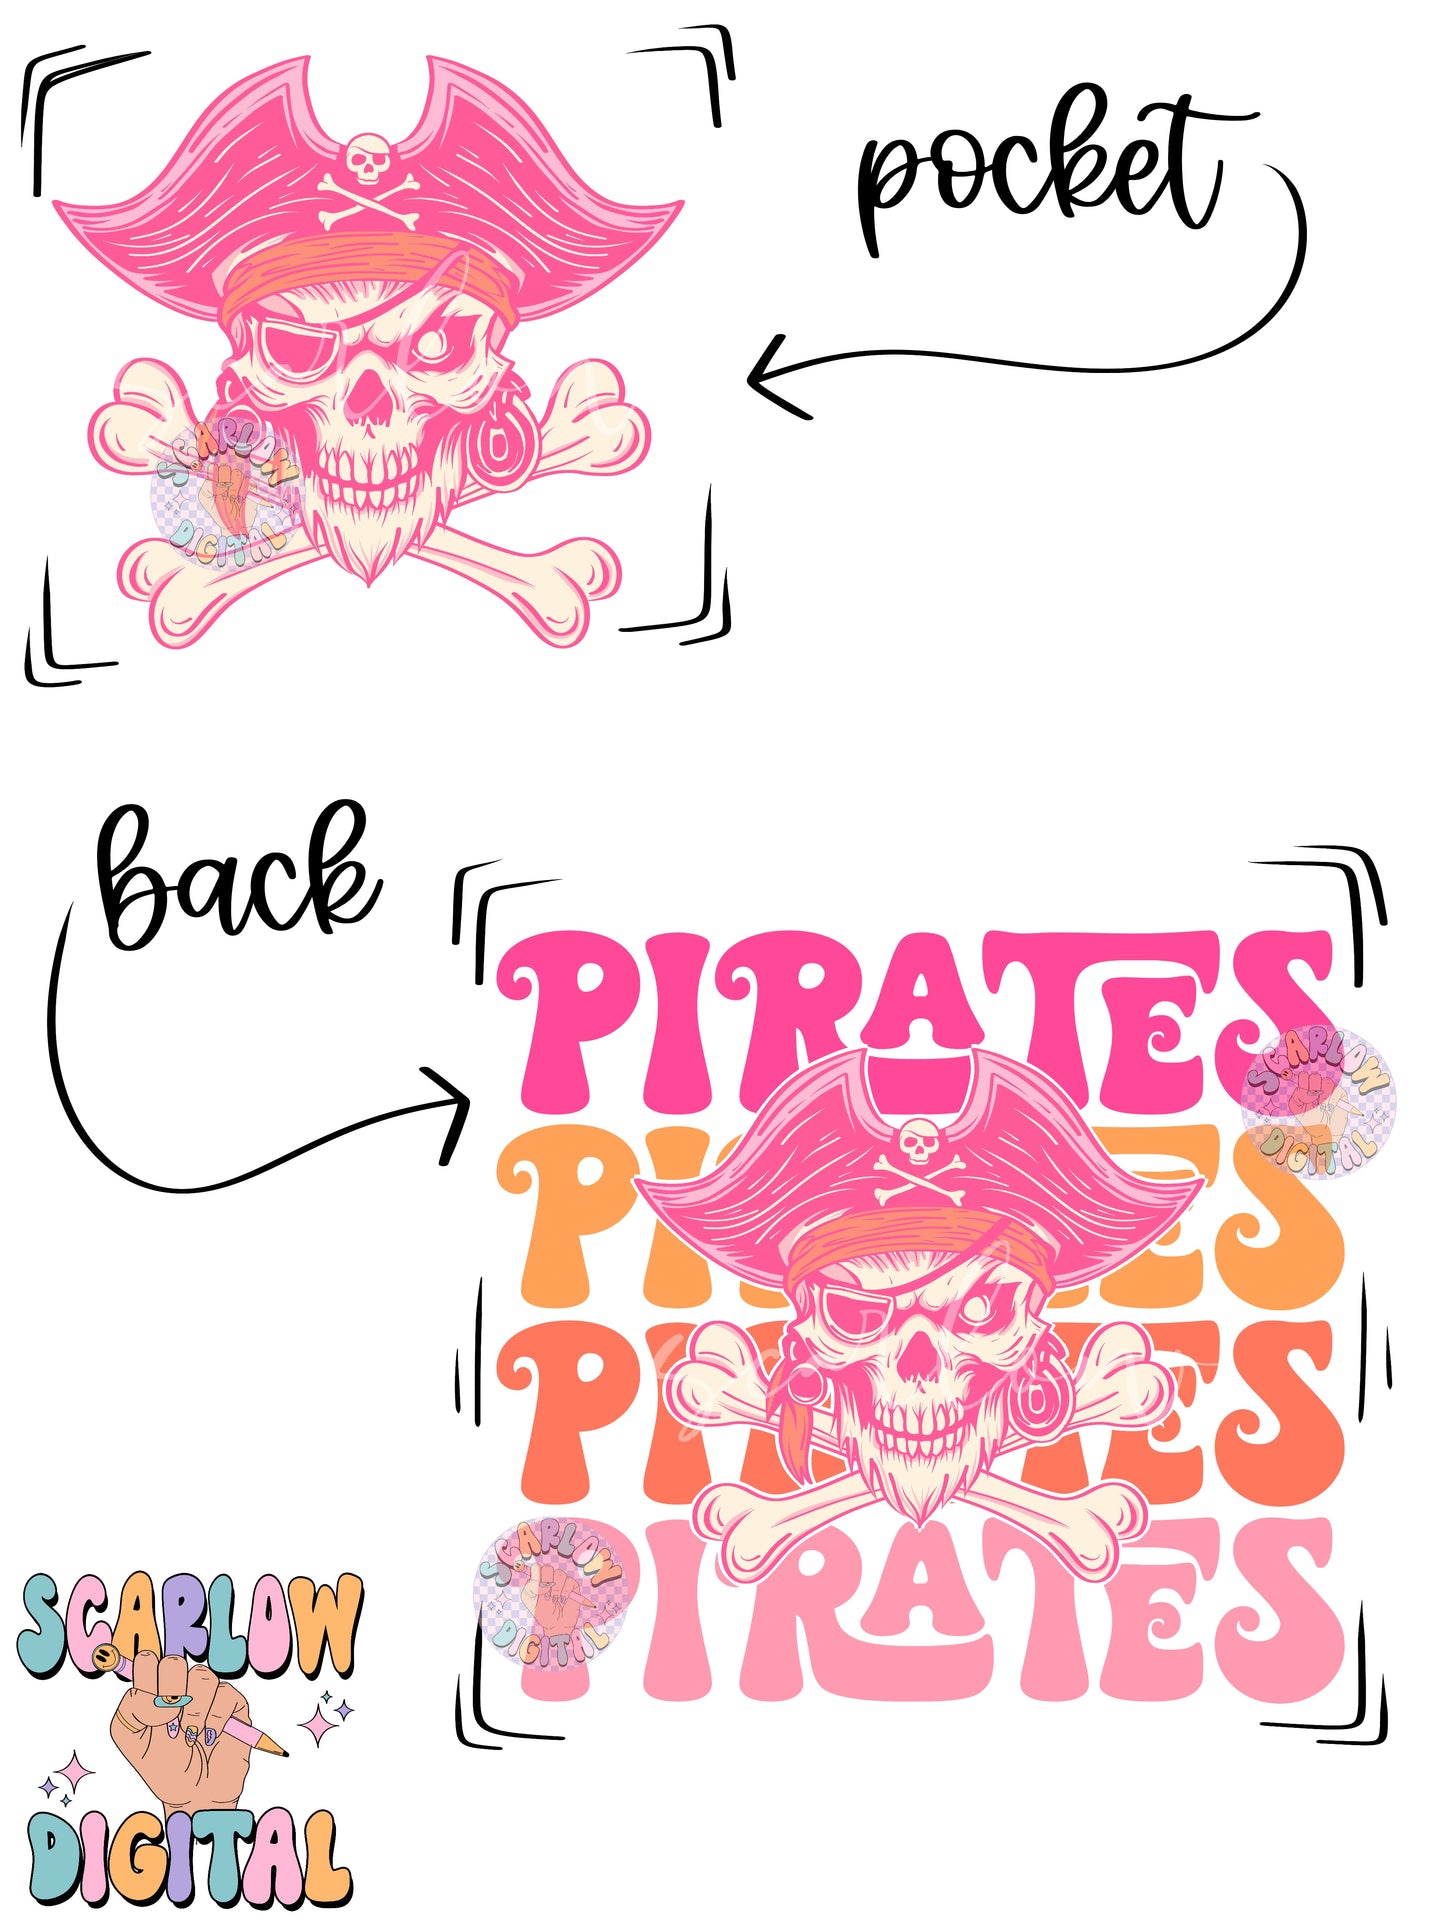 Pirates Front and Back PNG Digital Design Download, sports mascot png, football png, baseball png, retro png, trendy png, sports tshirt designs, school png